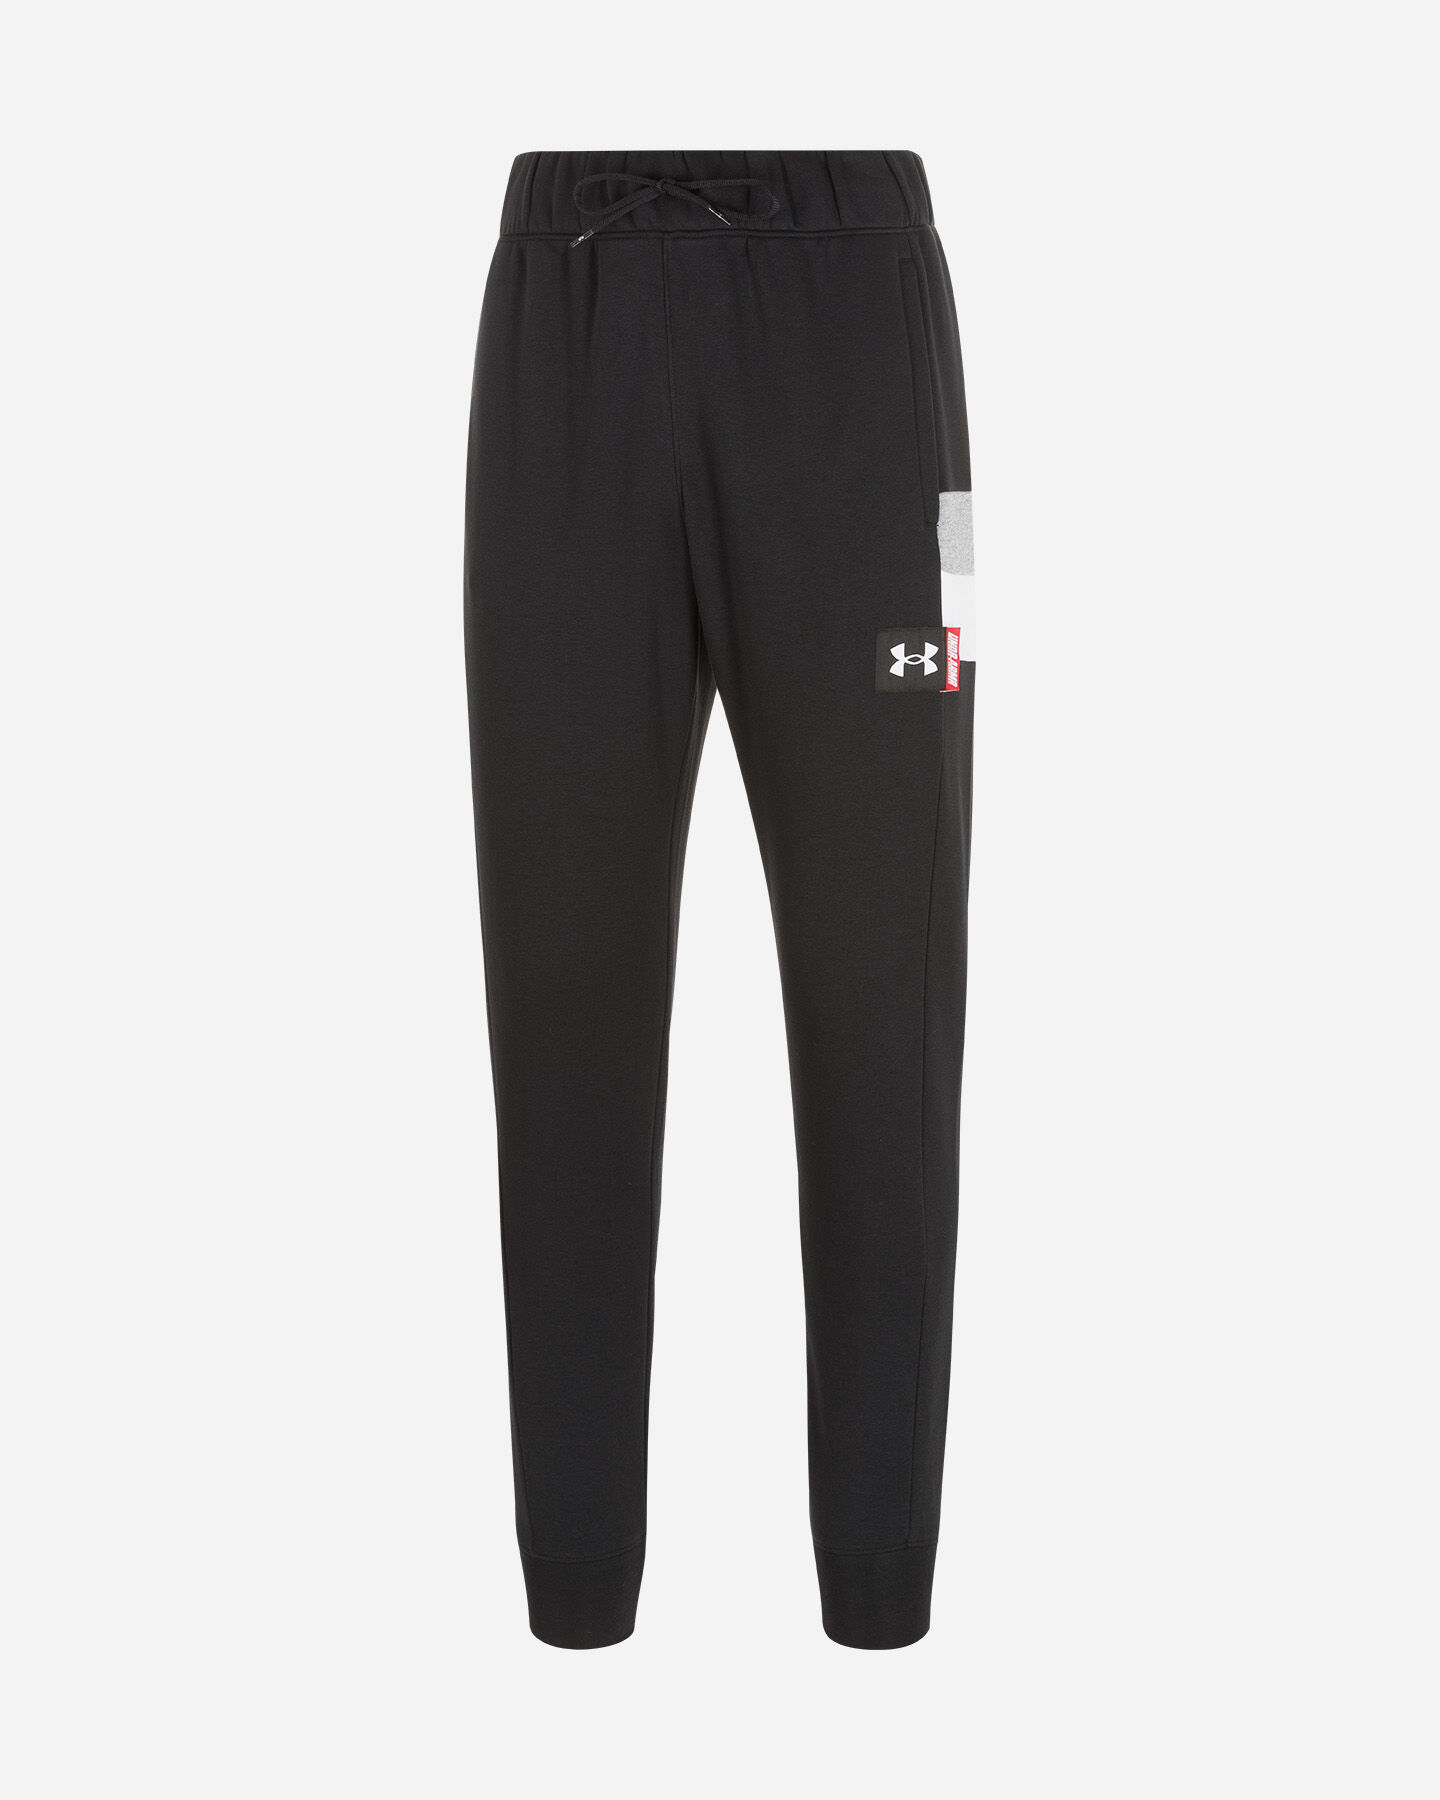  Pantalone UNDER ARMOUR BASELINE M S5336723|0001|XS scatto 0